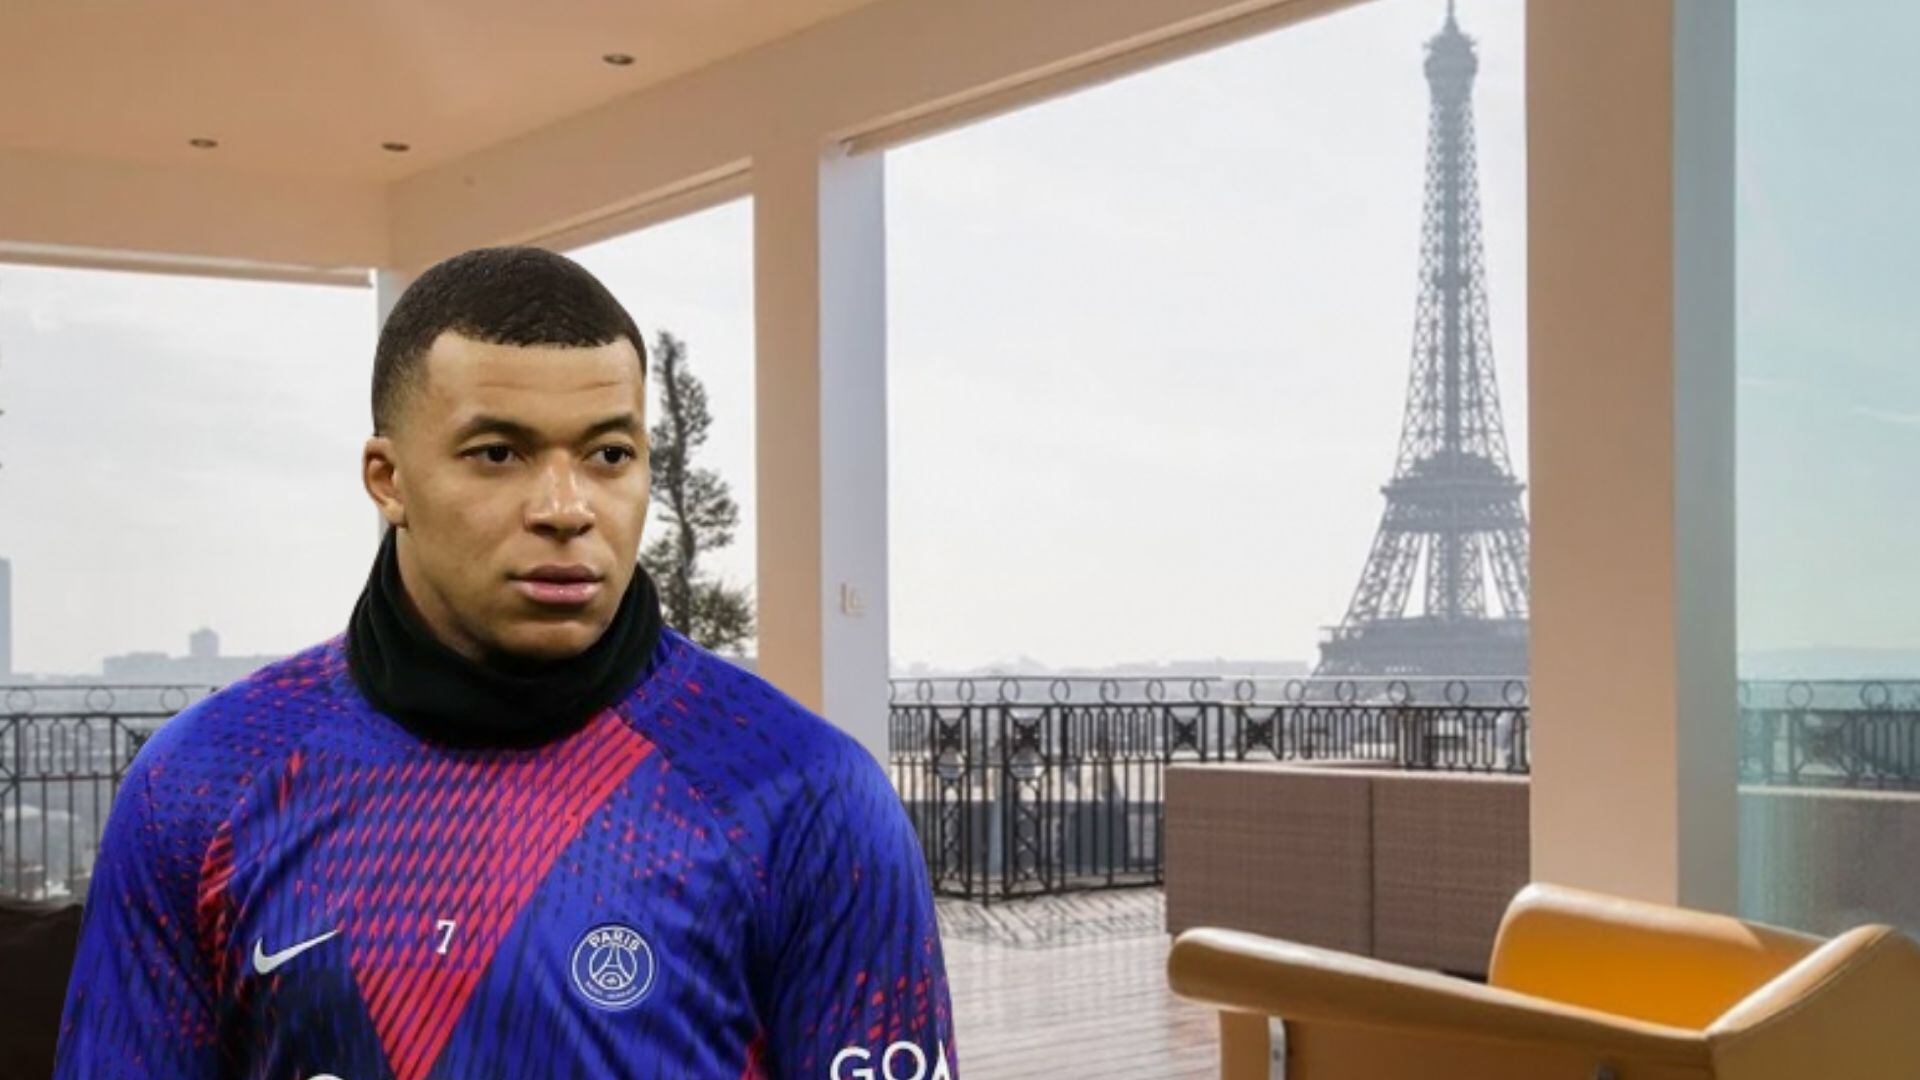 The $8.5 million mansion Mbappe will have to leave when he leaves PSG